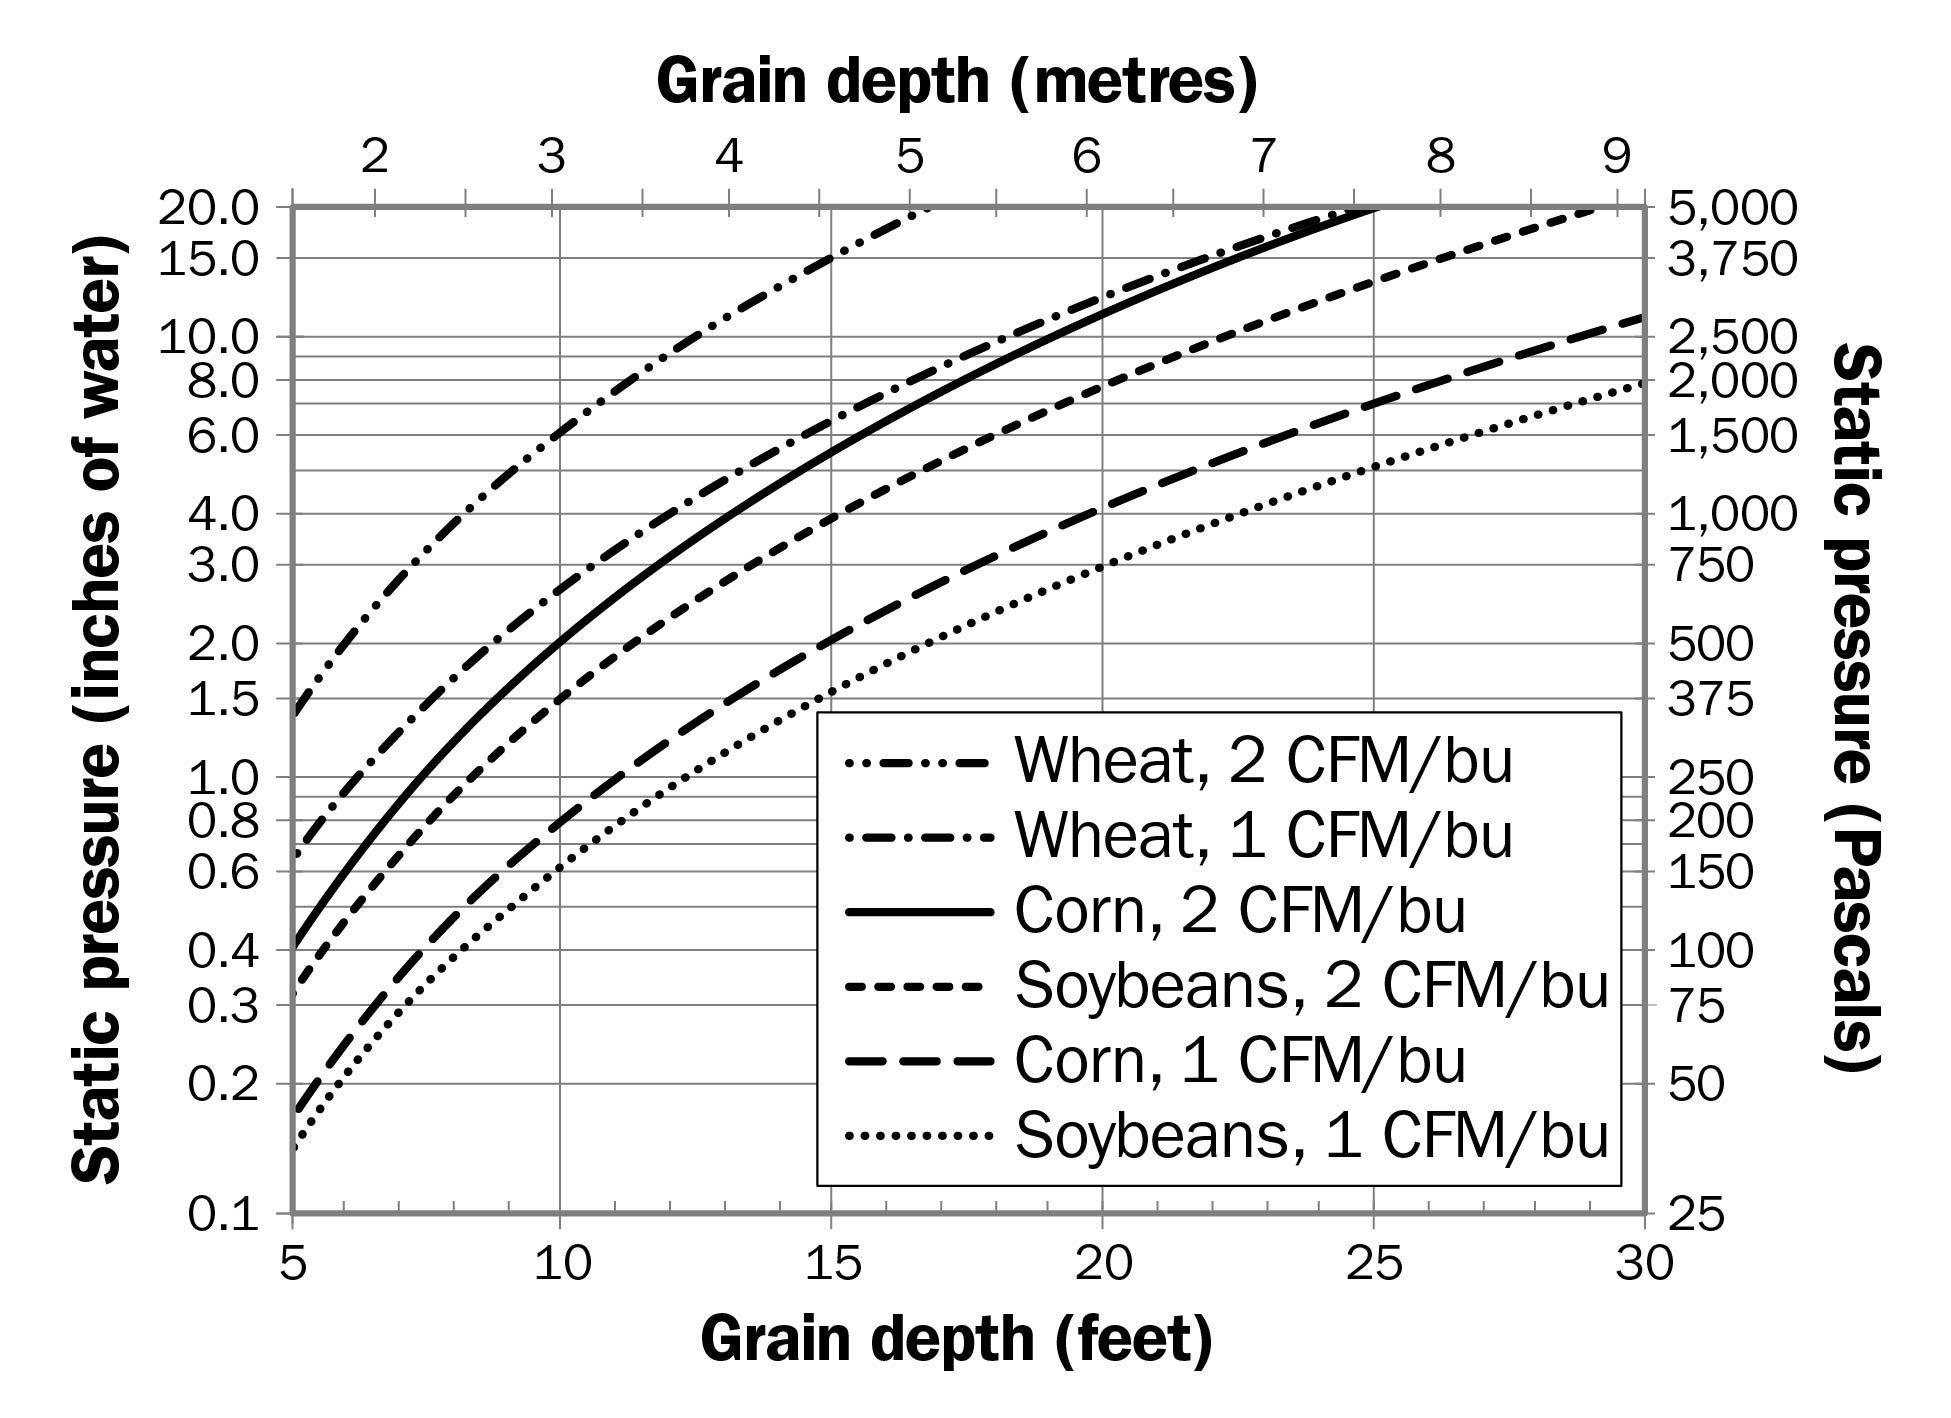 This graph shows static pressures compared to grain depth for corn, soybeans and wheat at 1 CFM/bu and 2 CFM/bu airflow rates. Higher airflow rates and/or deeper grain results in higher static pressures.